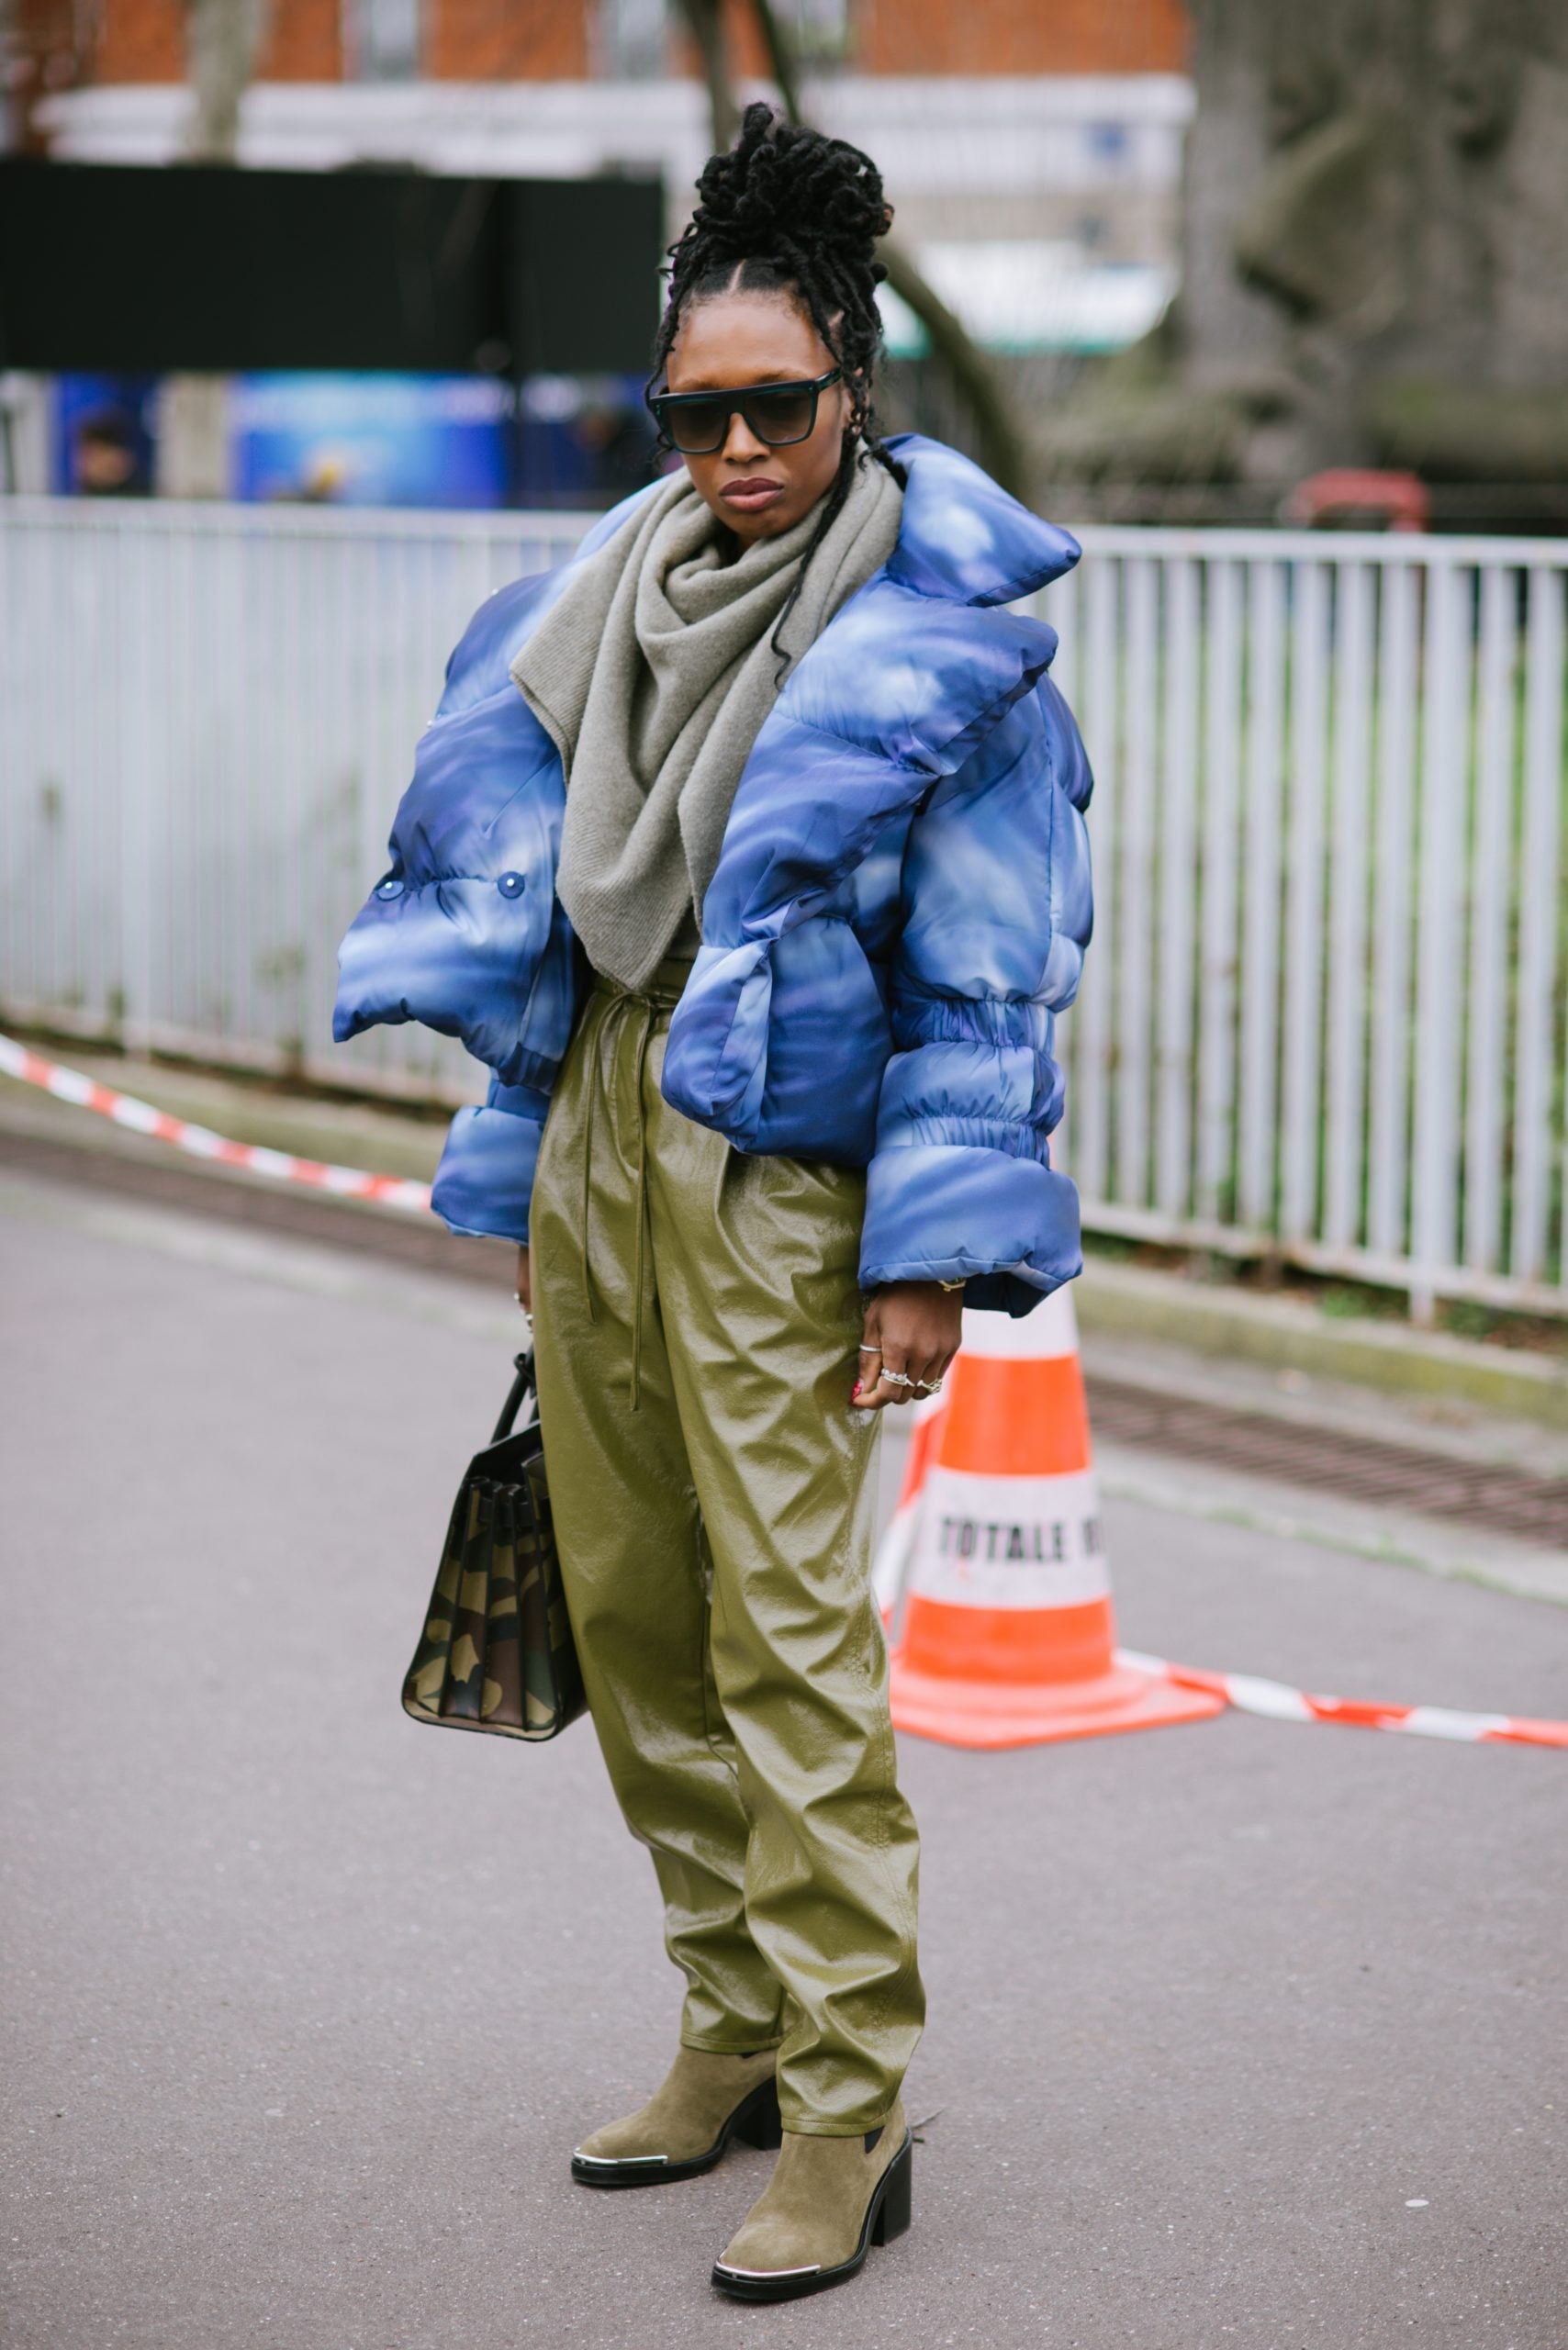 Our Favorite Street Style Moments In Europe This Fashion Month